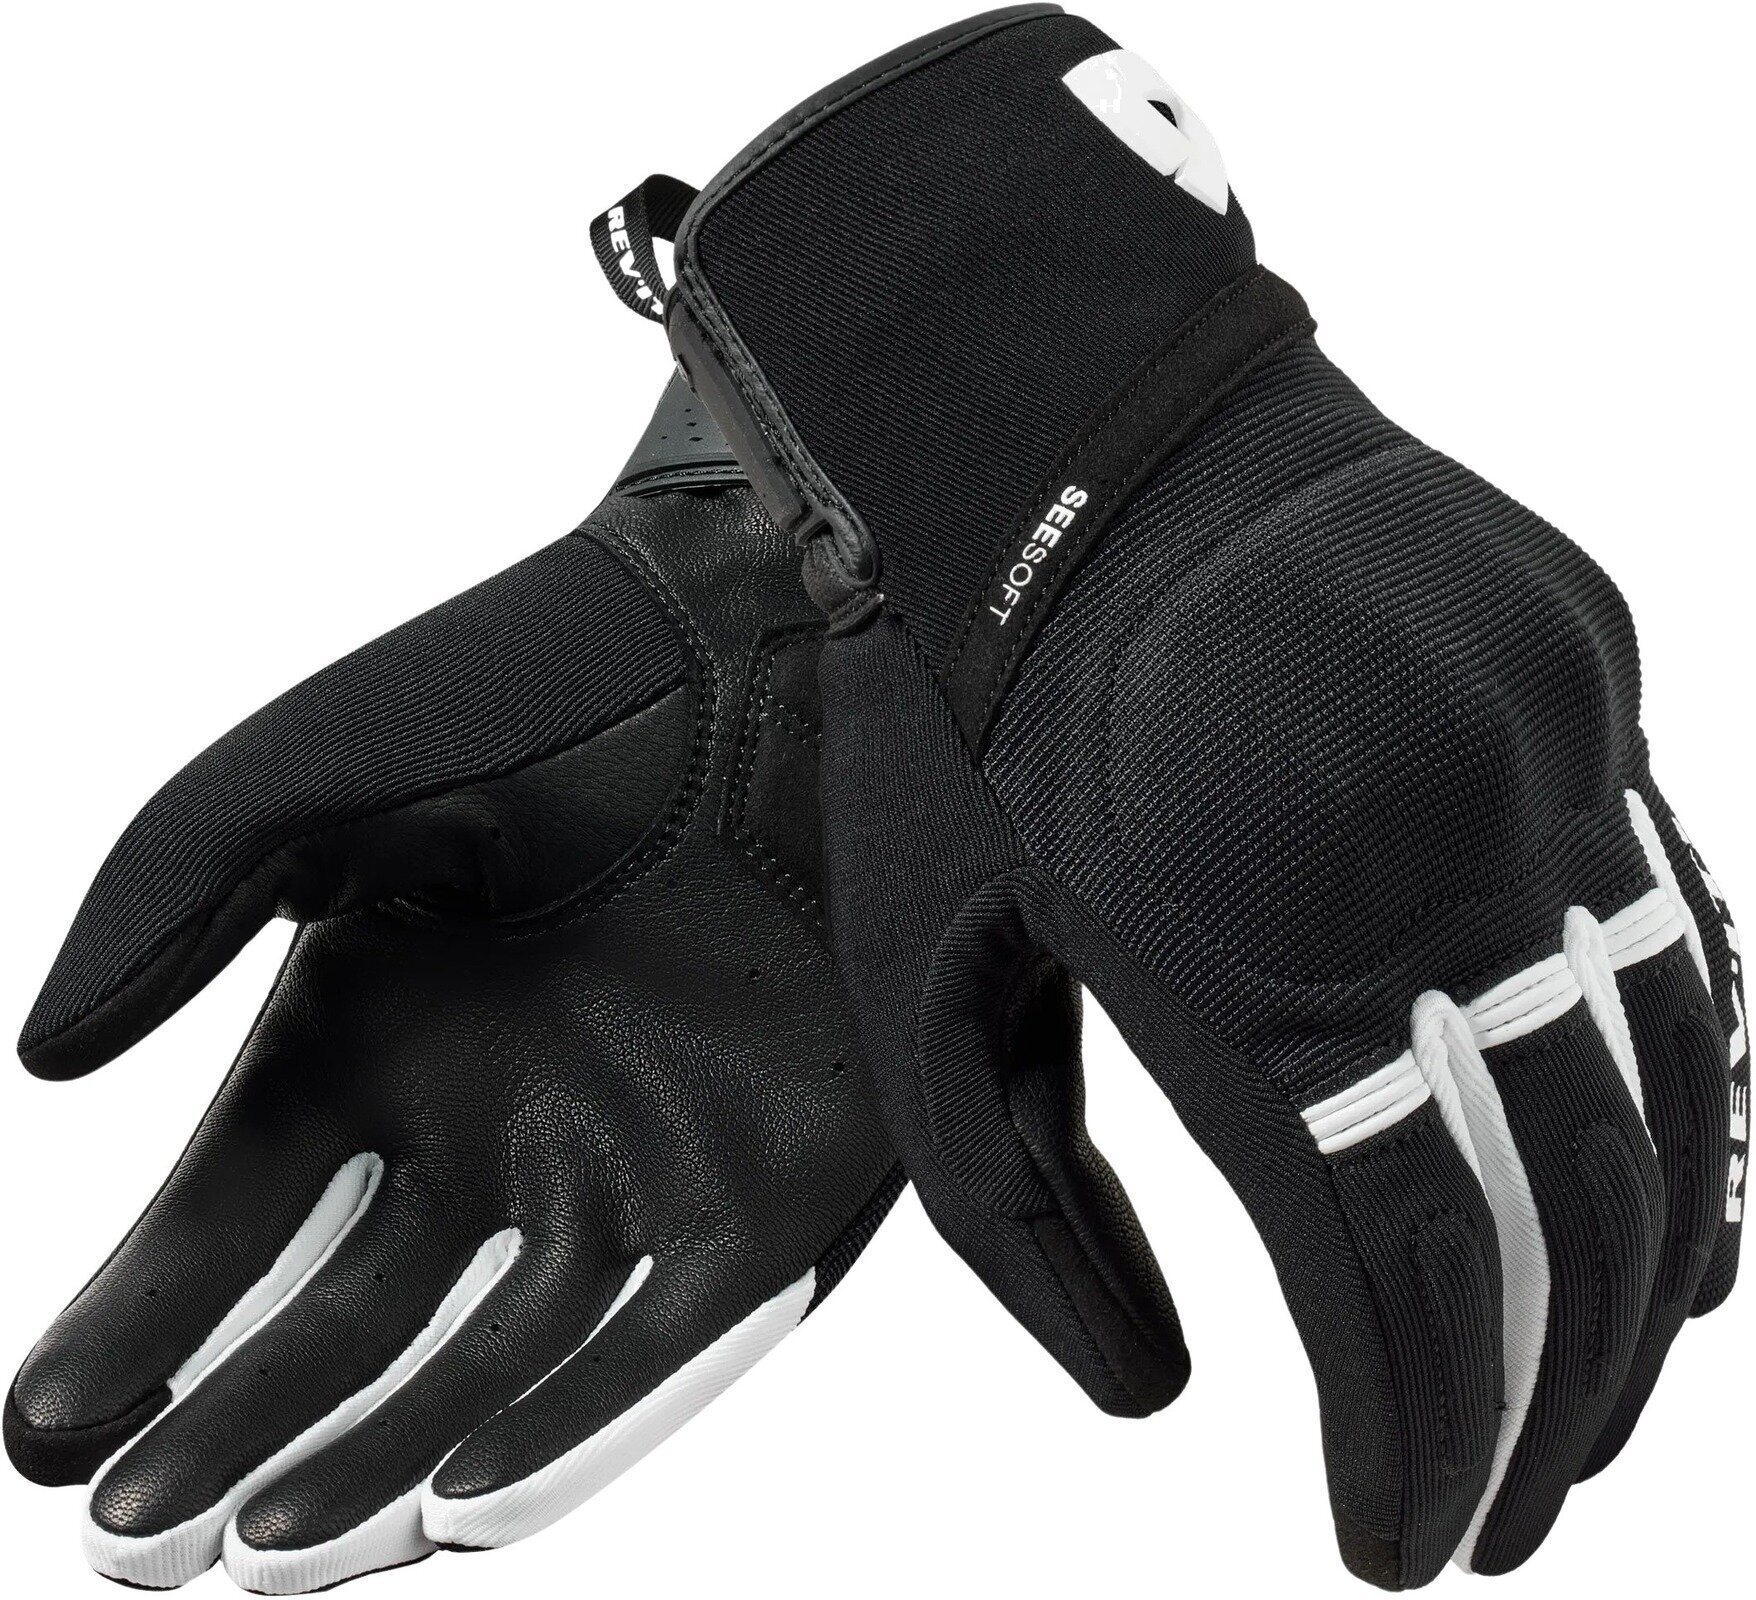 Motorcycle Gloves Rev'it! Gloves Mosca 2 Black/White L Motorcycle Gloves